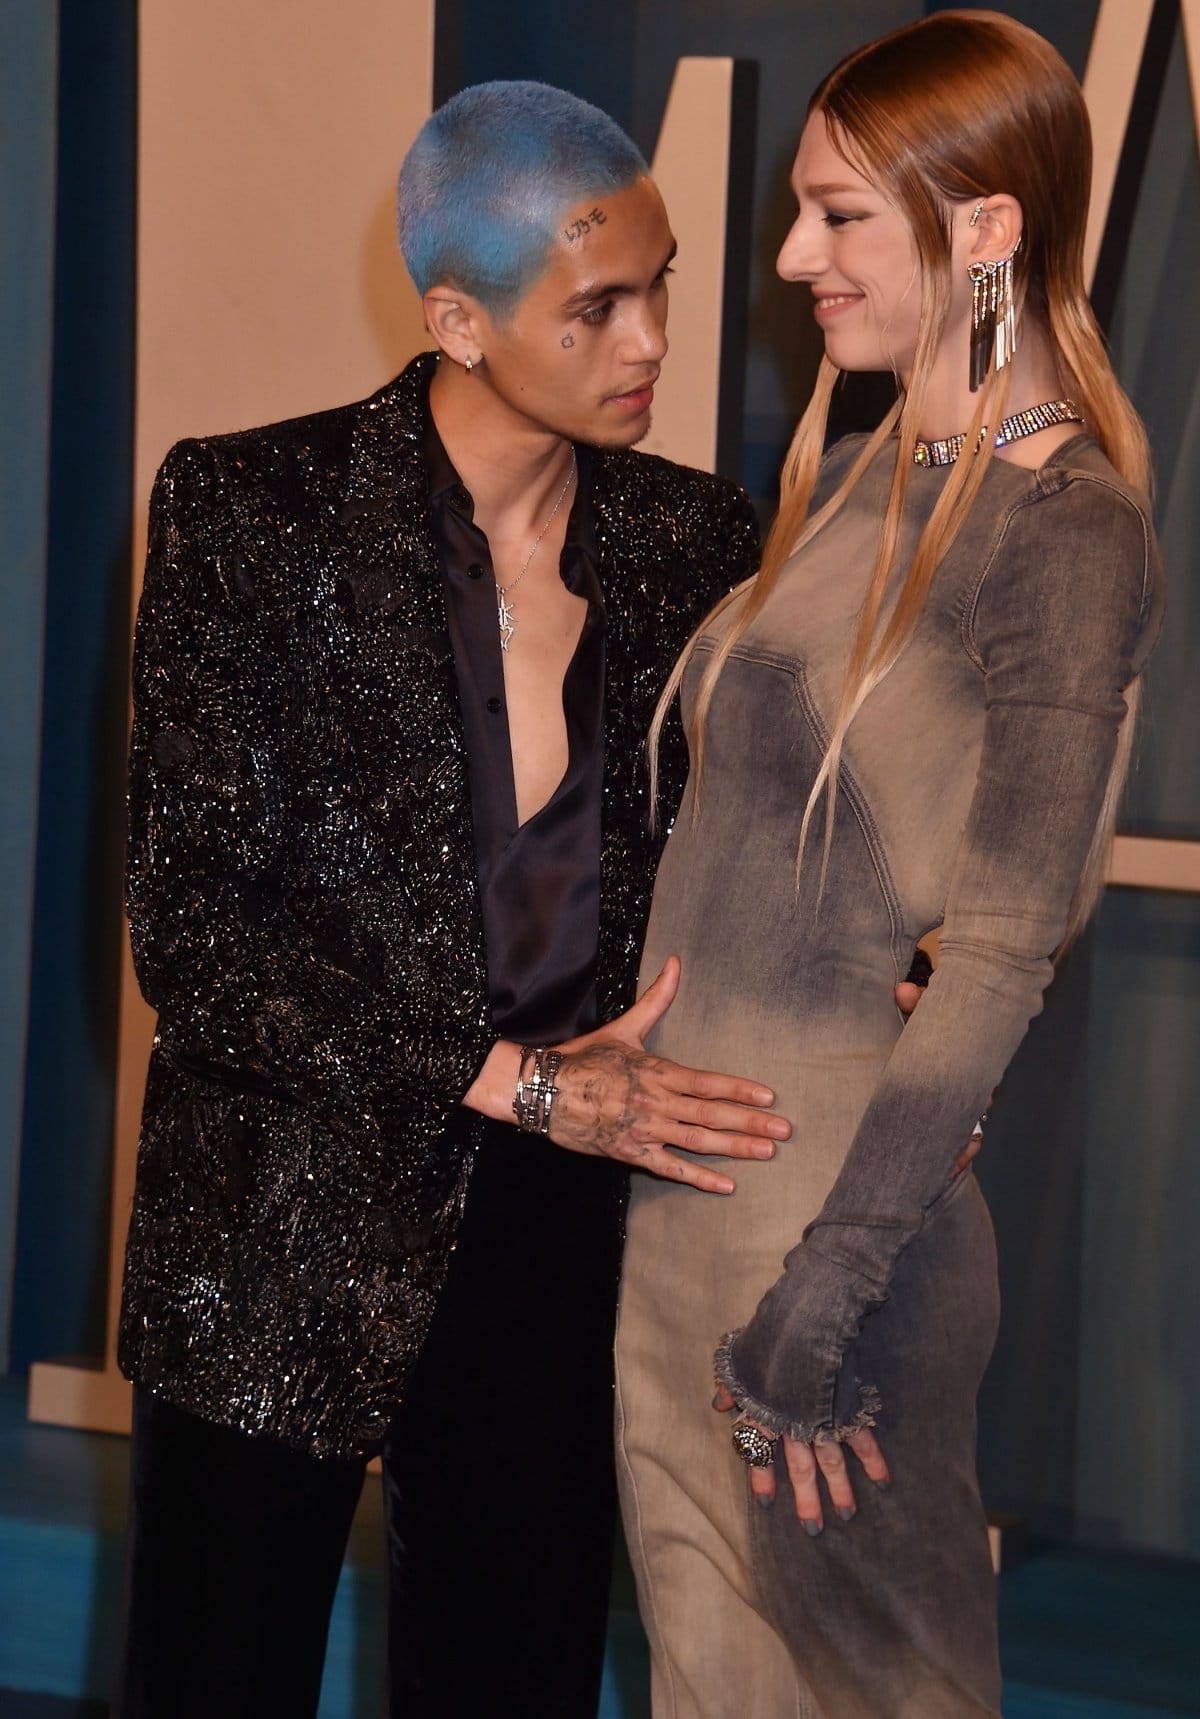 Boyfriend and Euphoria co-star Dominic Fike helps Hunter Schafer stay grounded amidst the chaos of being a celebrity